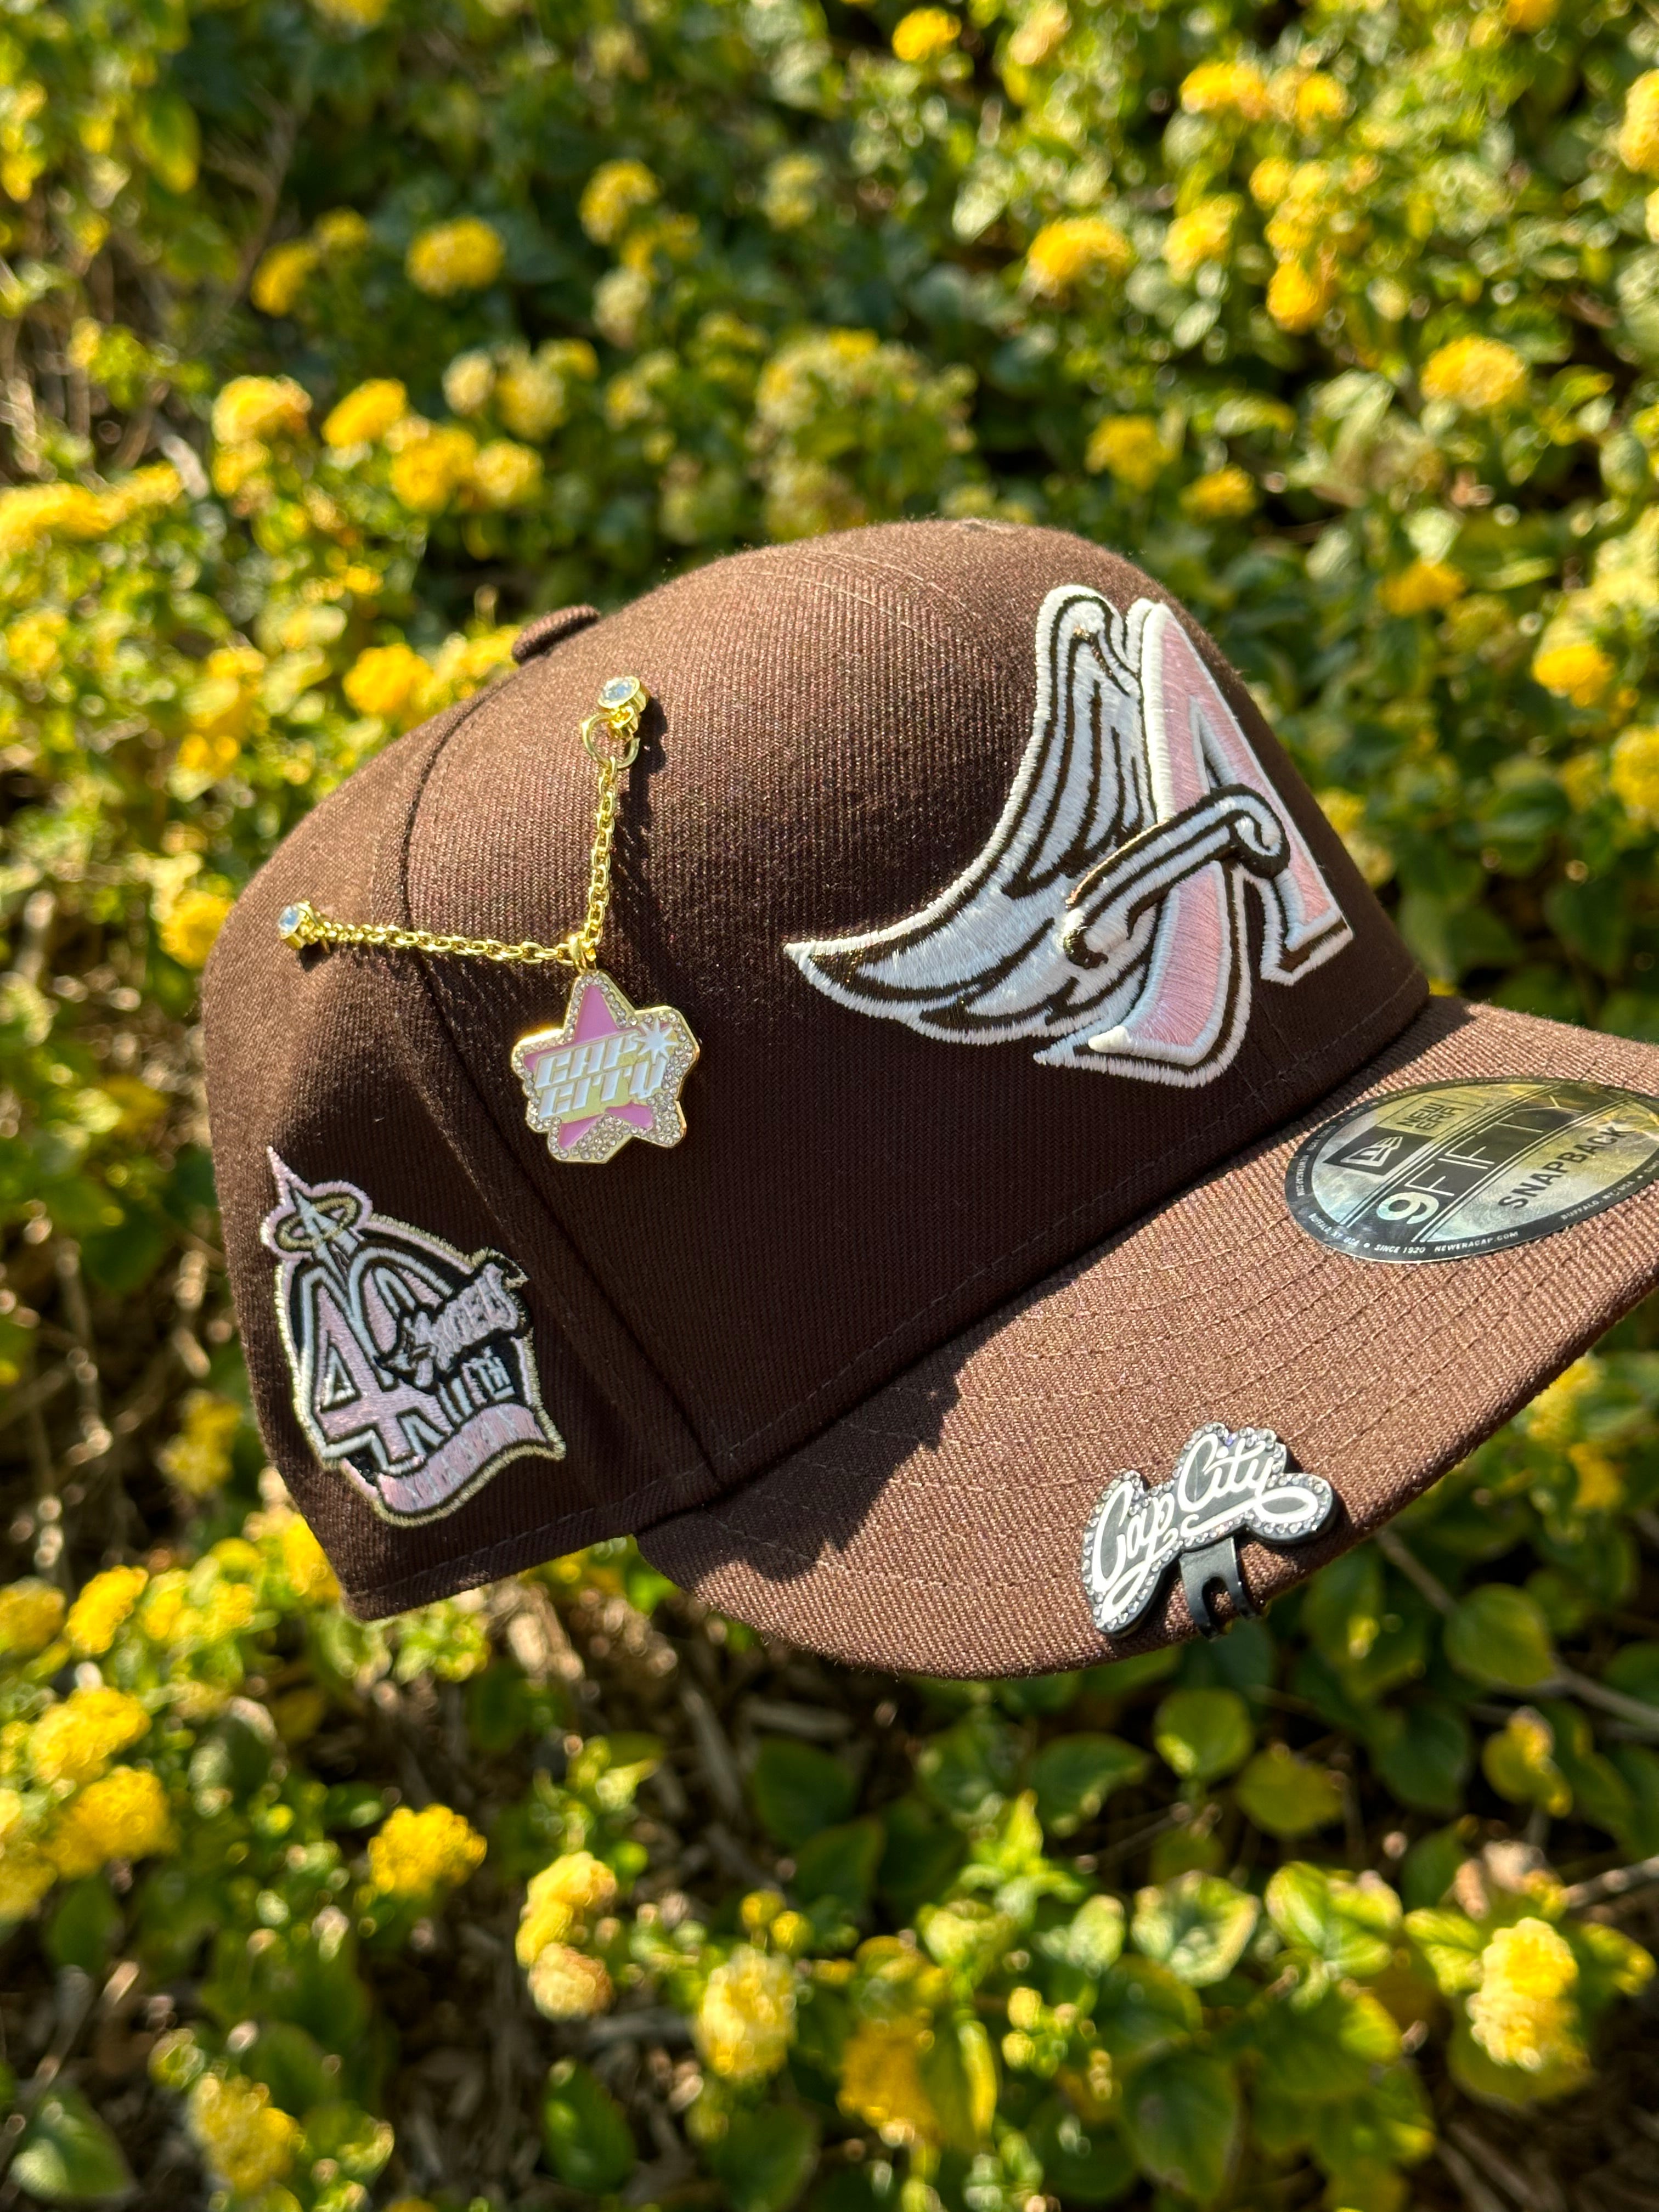 NEW ERA EXCLUSIVE 9FIFTY MOCHA BROWN ANAHEIM ANGELS SNAPBACK W/ 50TH ANNIVERSARY SIDE PATCH